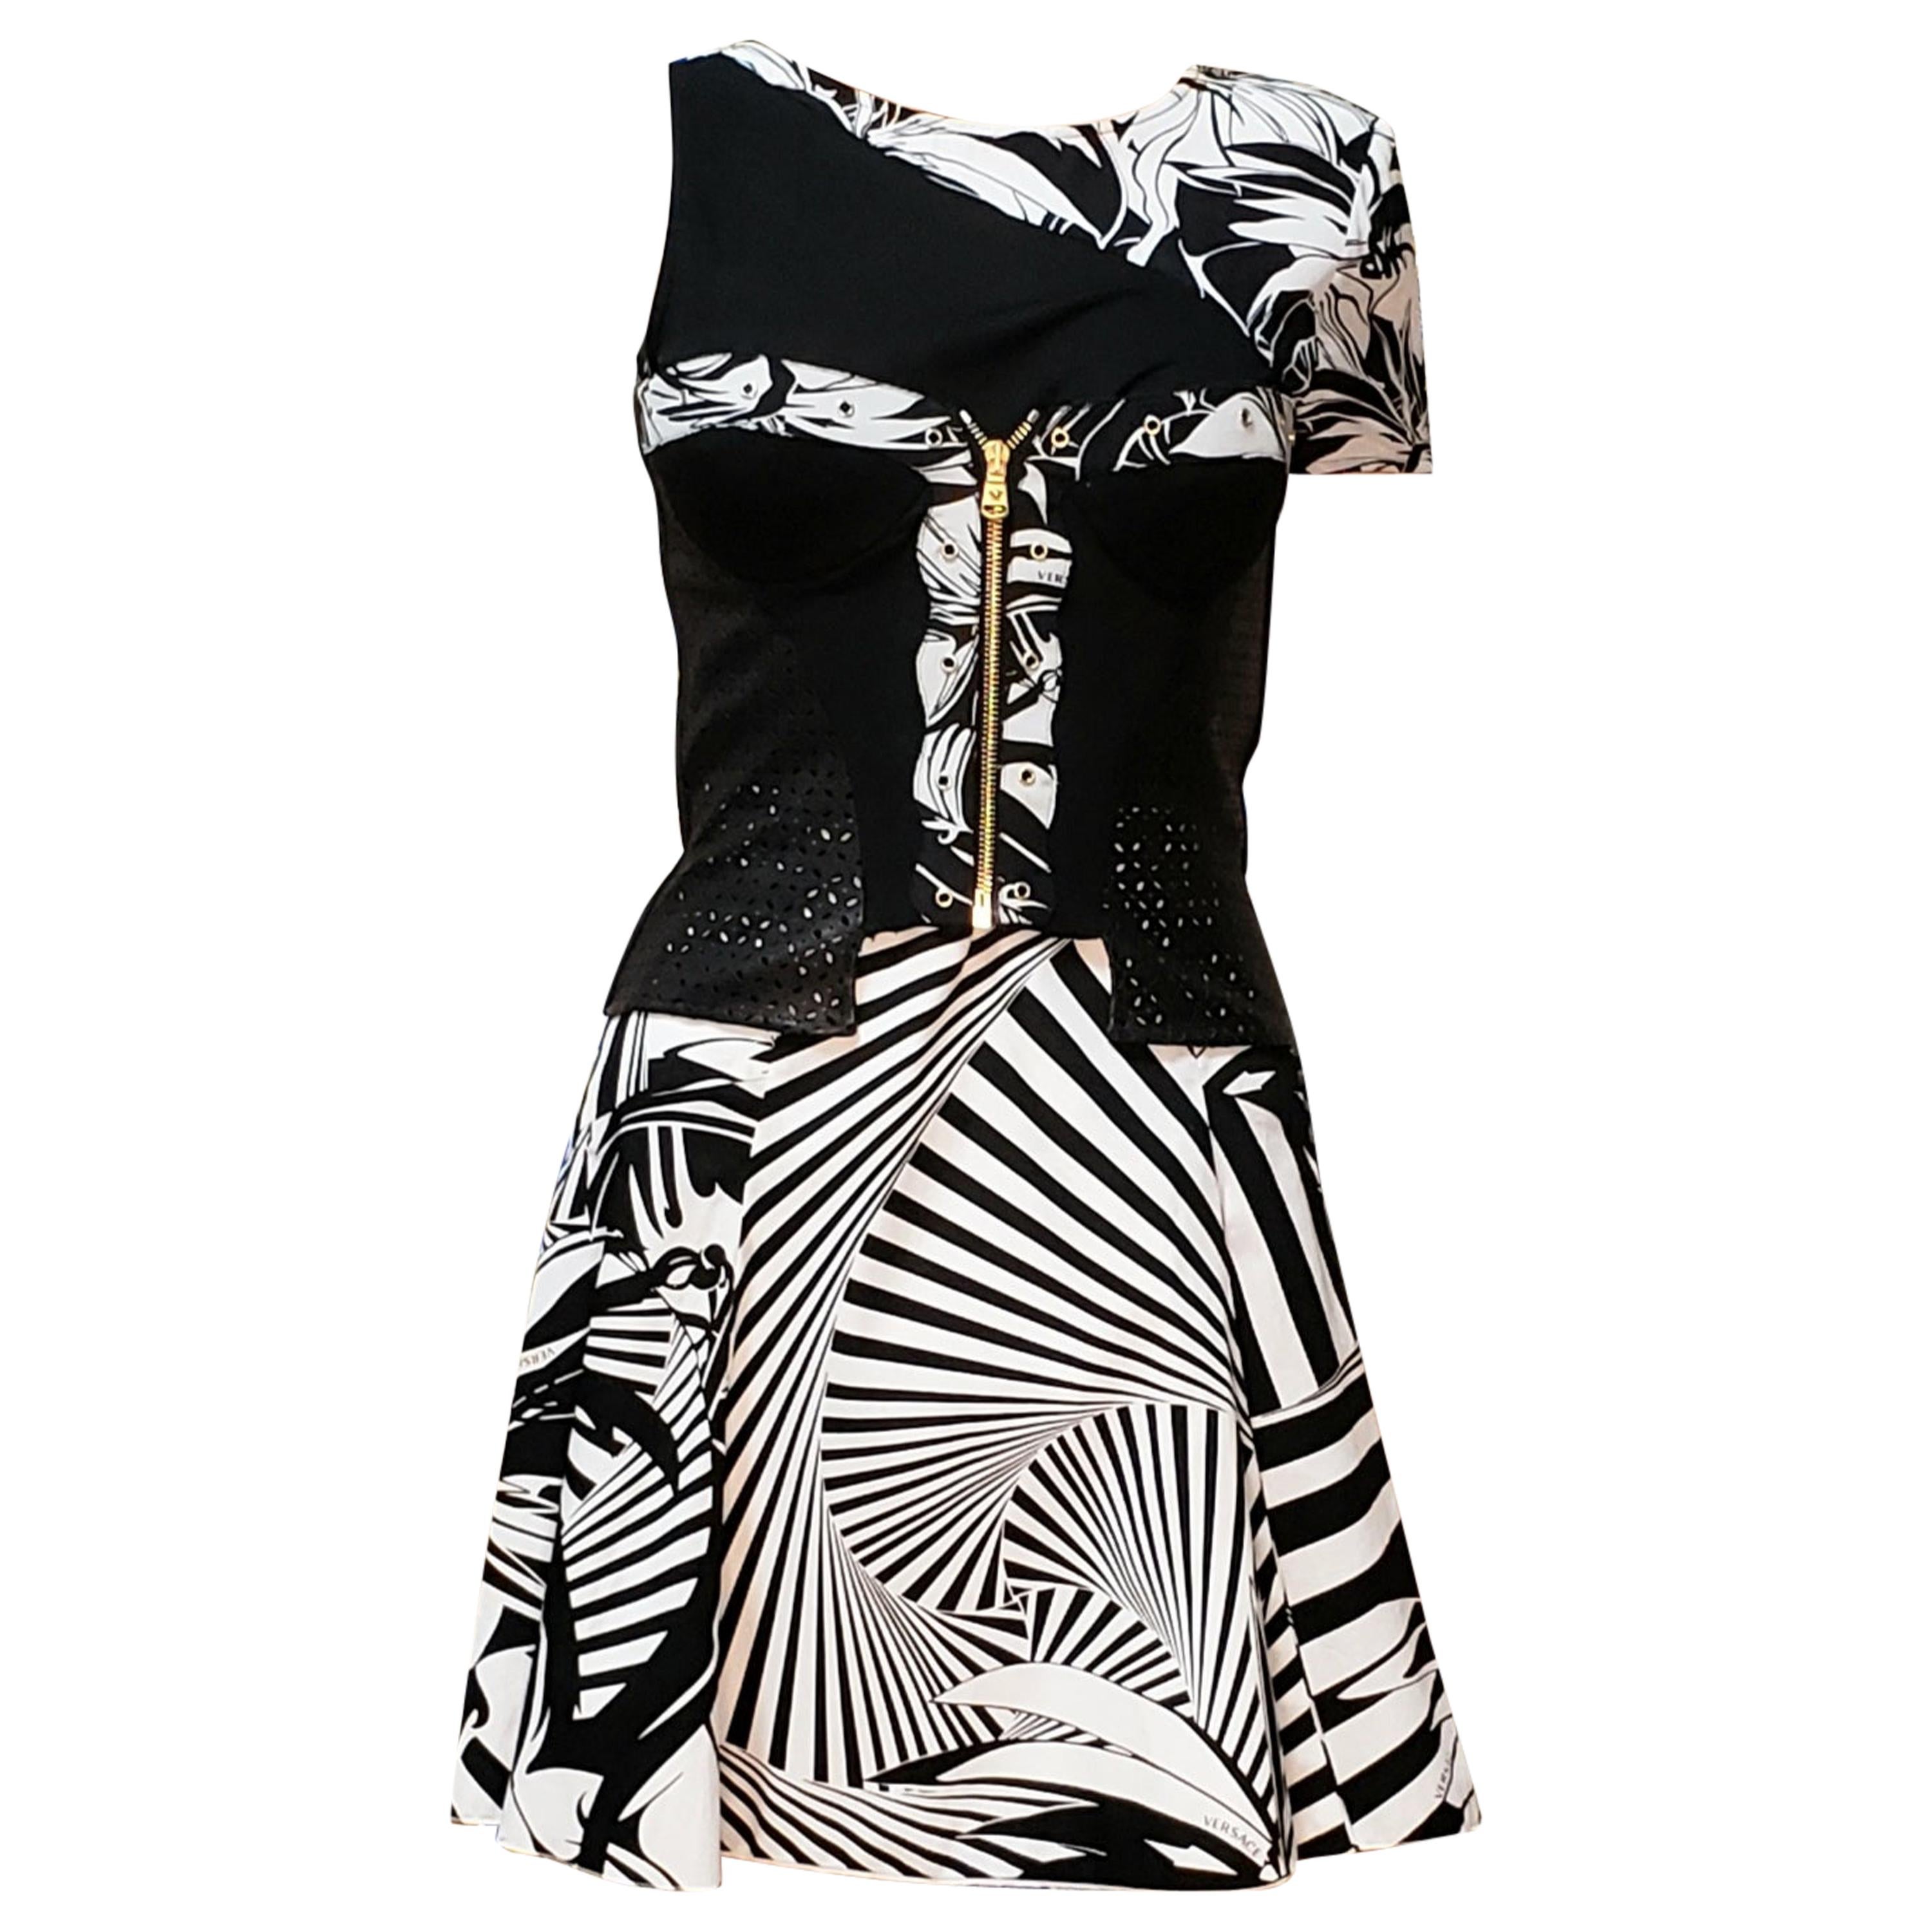 Resort/12 Look # 8 VERSACE FLORAL BLACK and WHITE SUIT w/LEATHER CORSET 38 - 2 For Sale